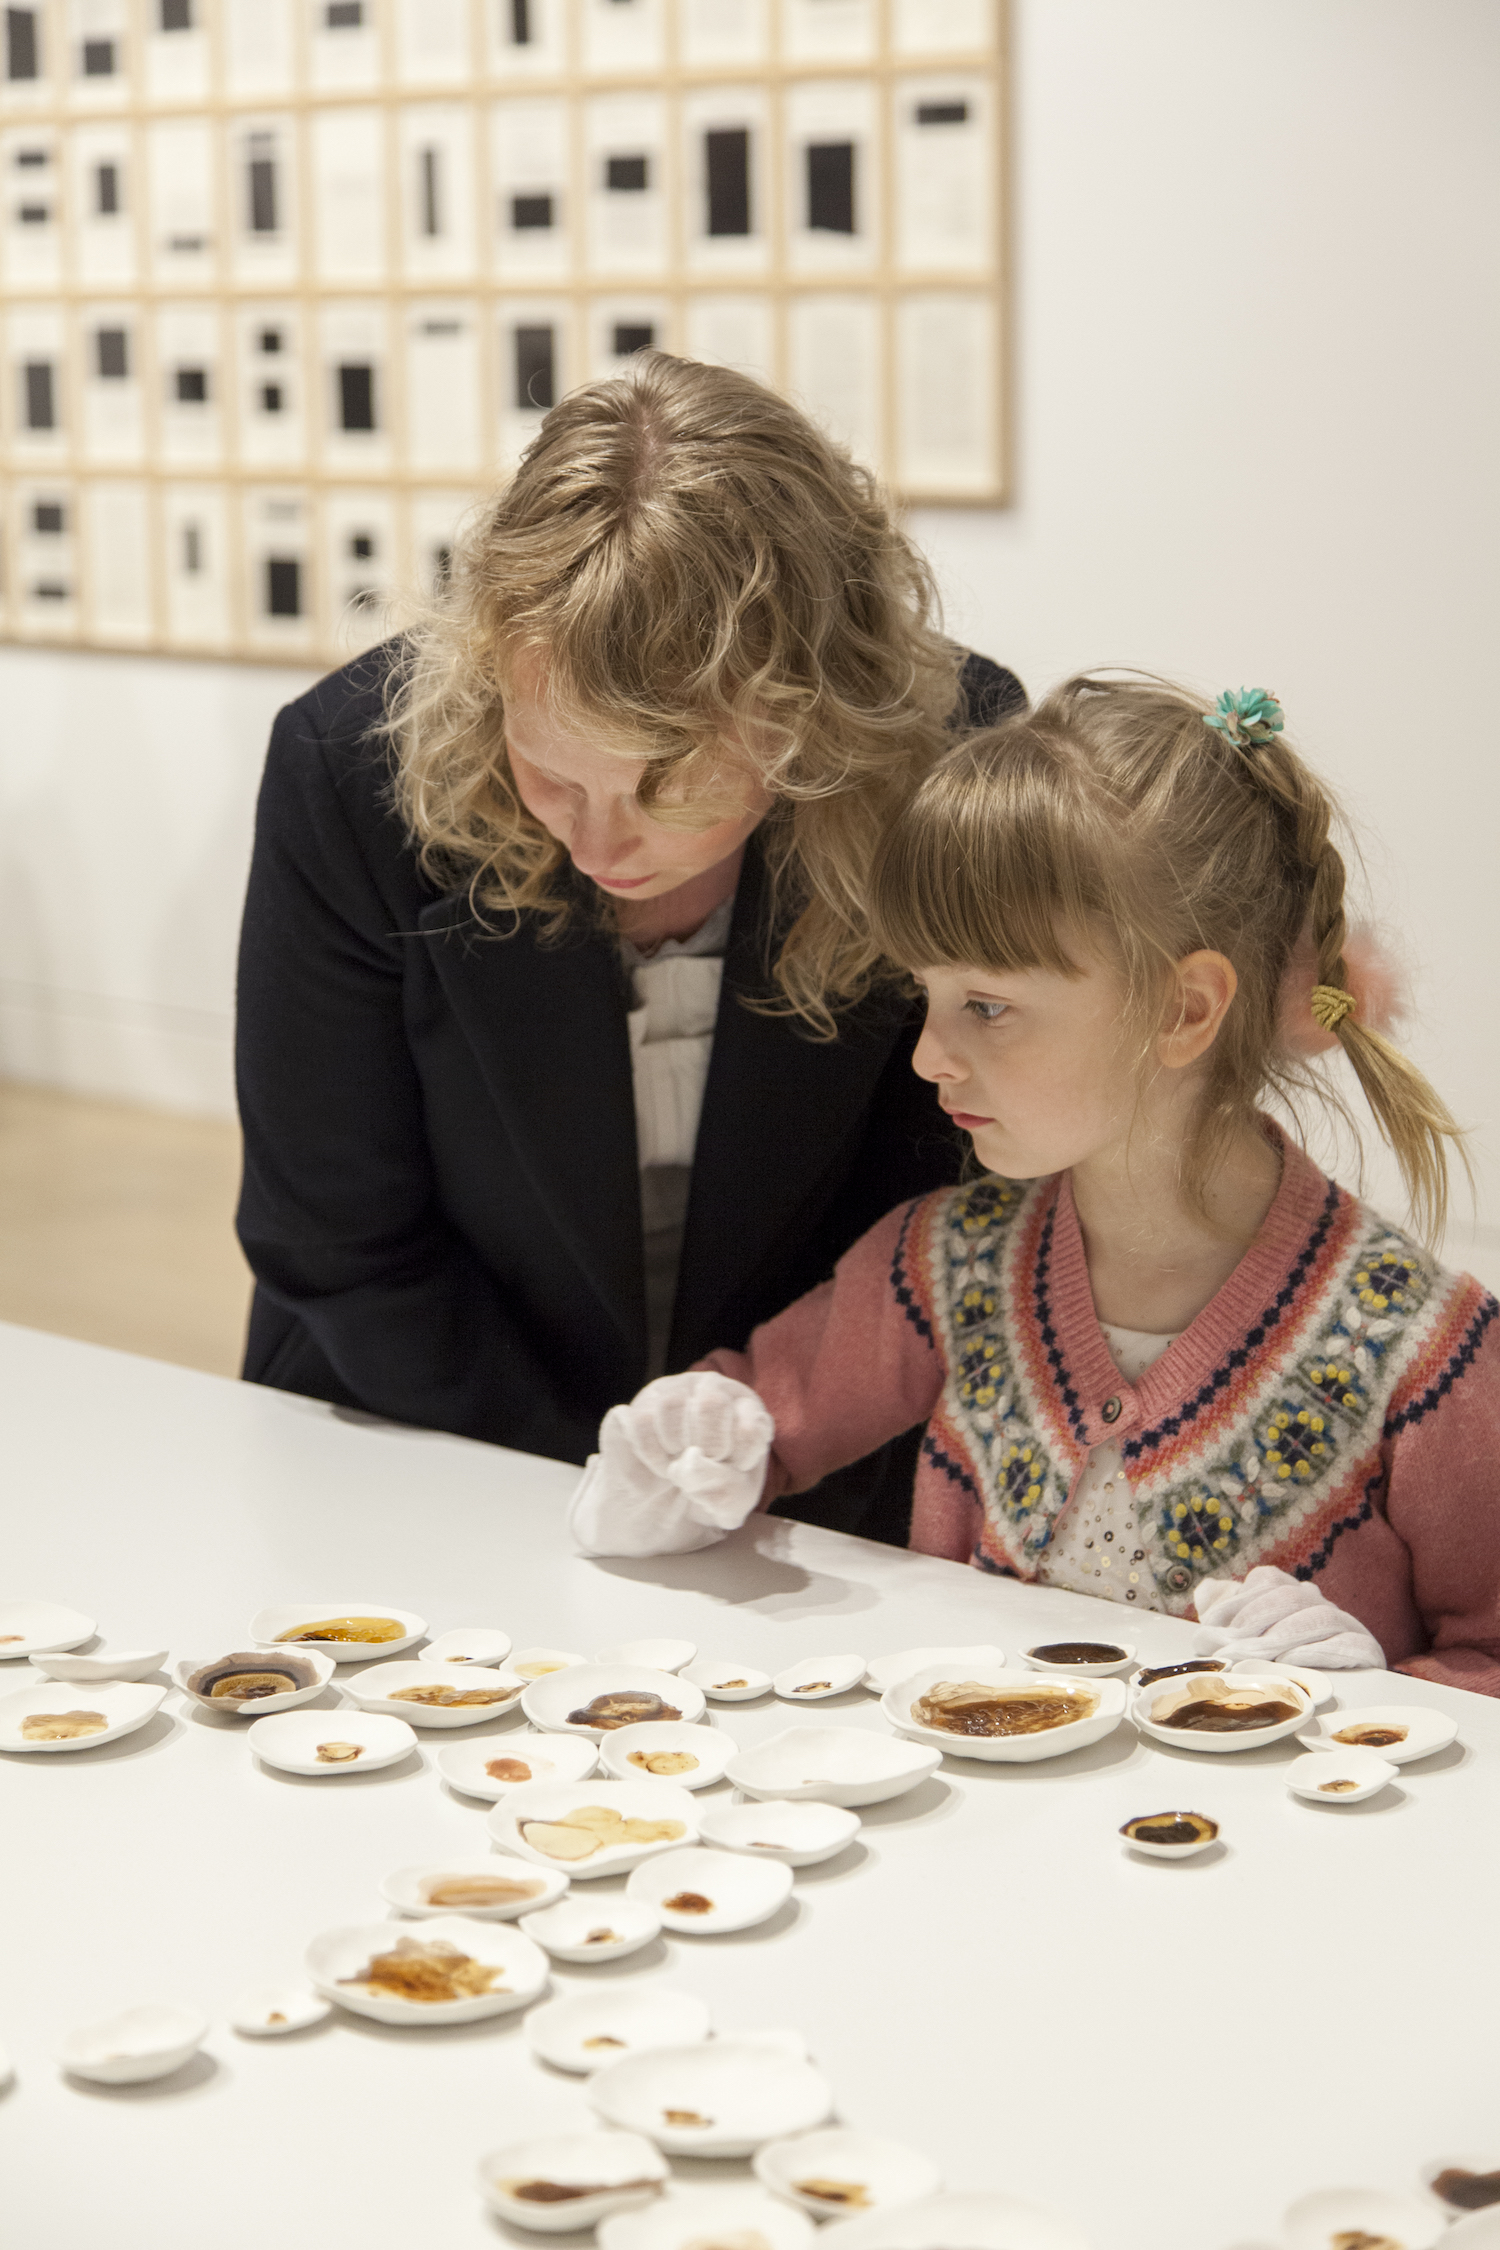 Adult and child observing small dishes of brown pigments